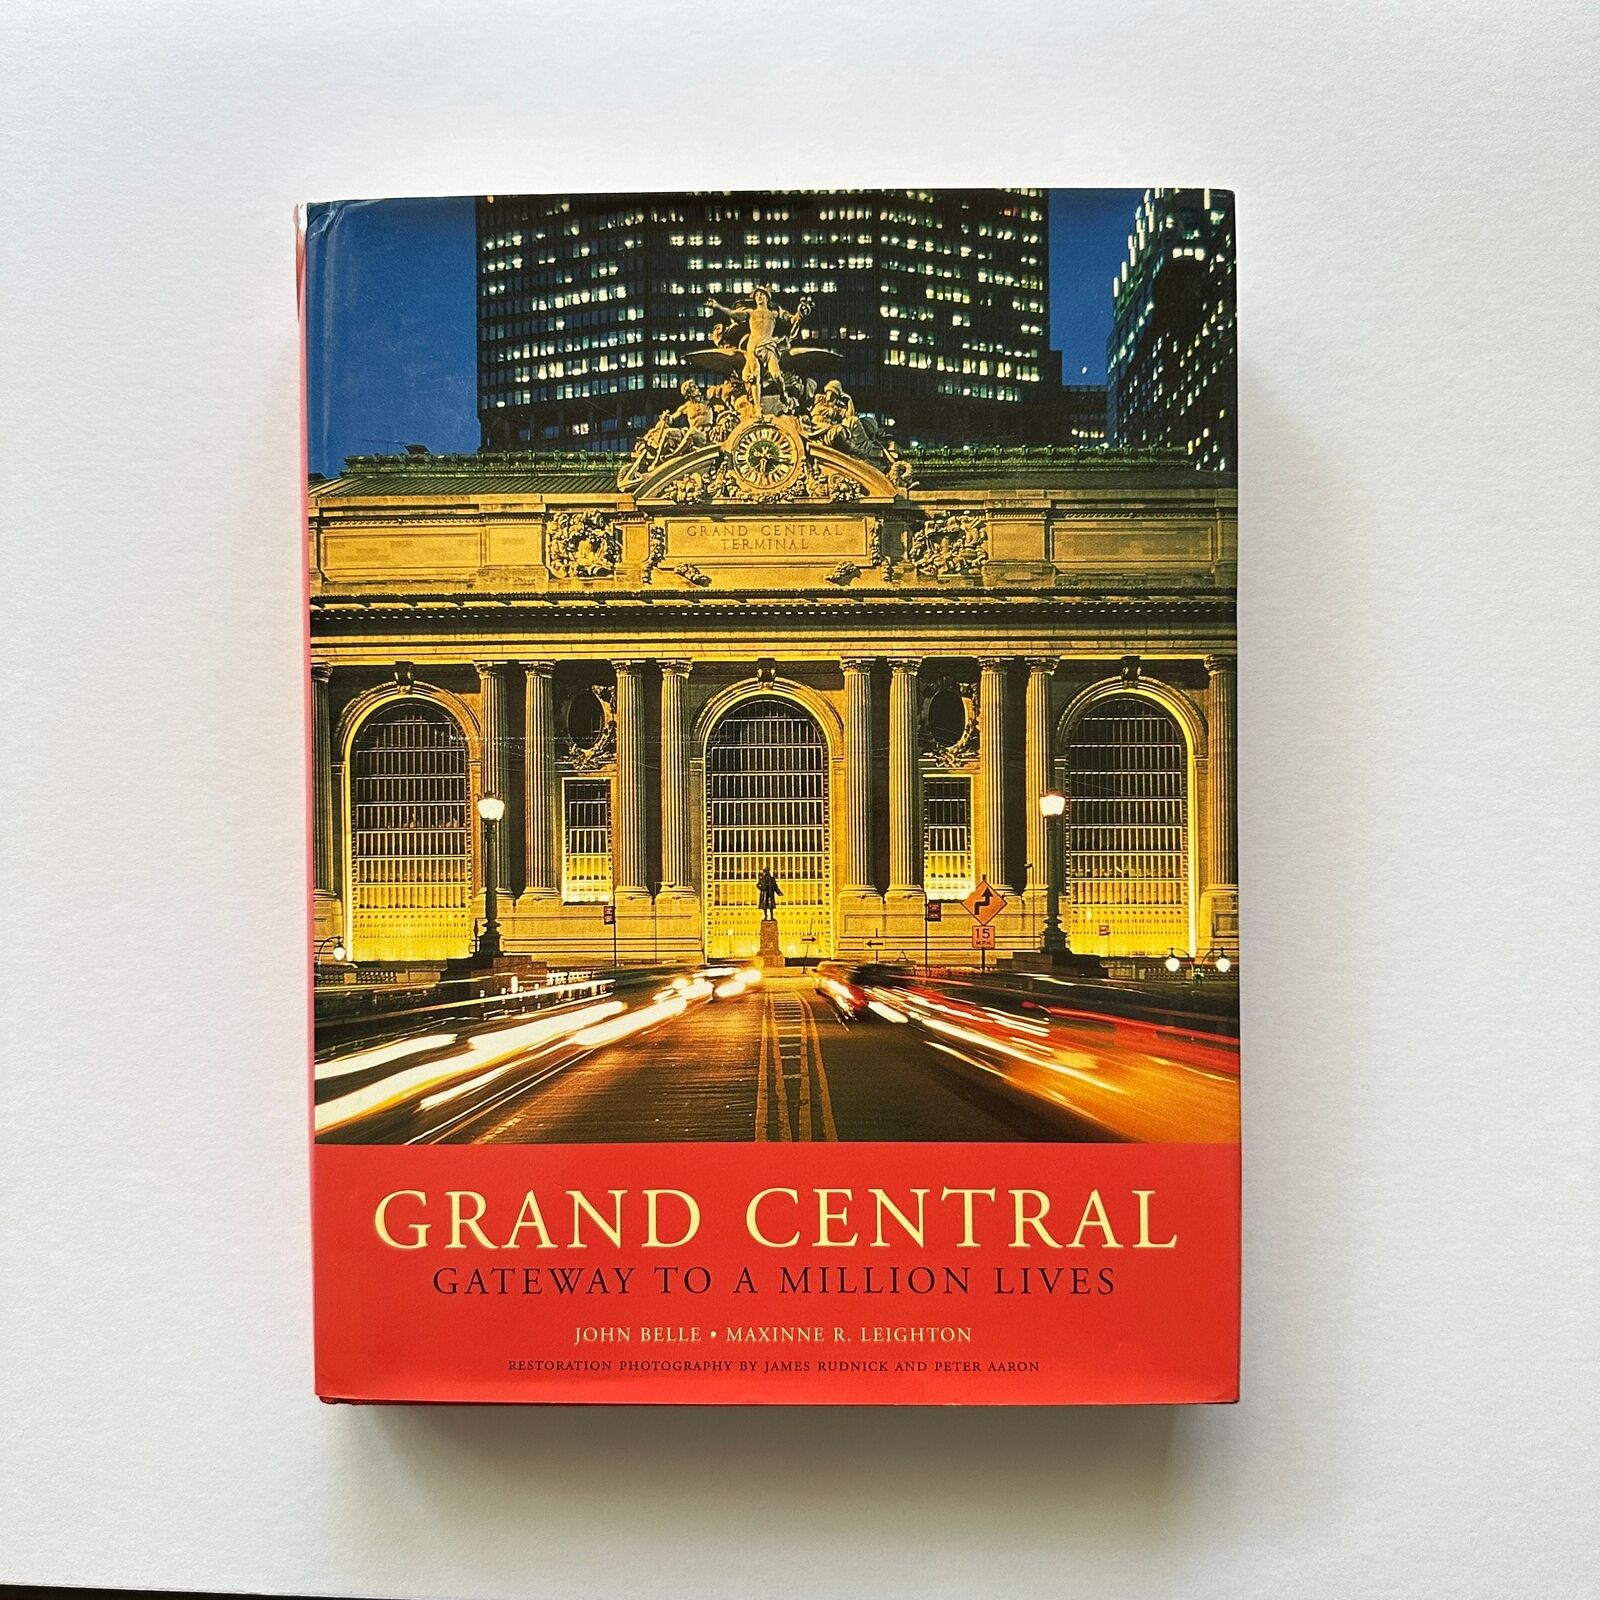 Grand Central: Gateway to a Million Lives by John Belle & Maxinne R. Leighton R